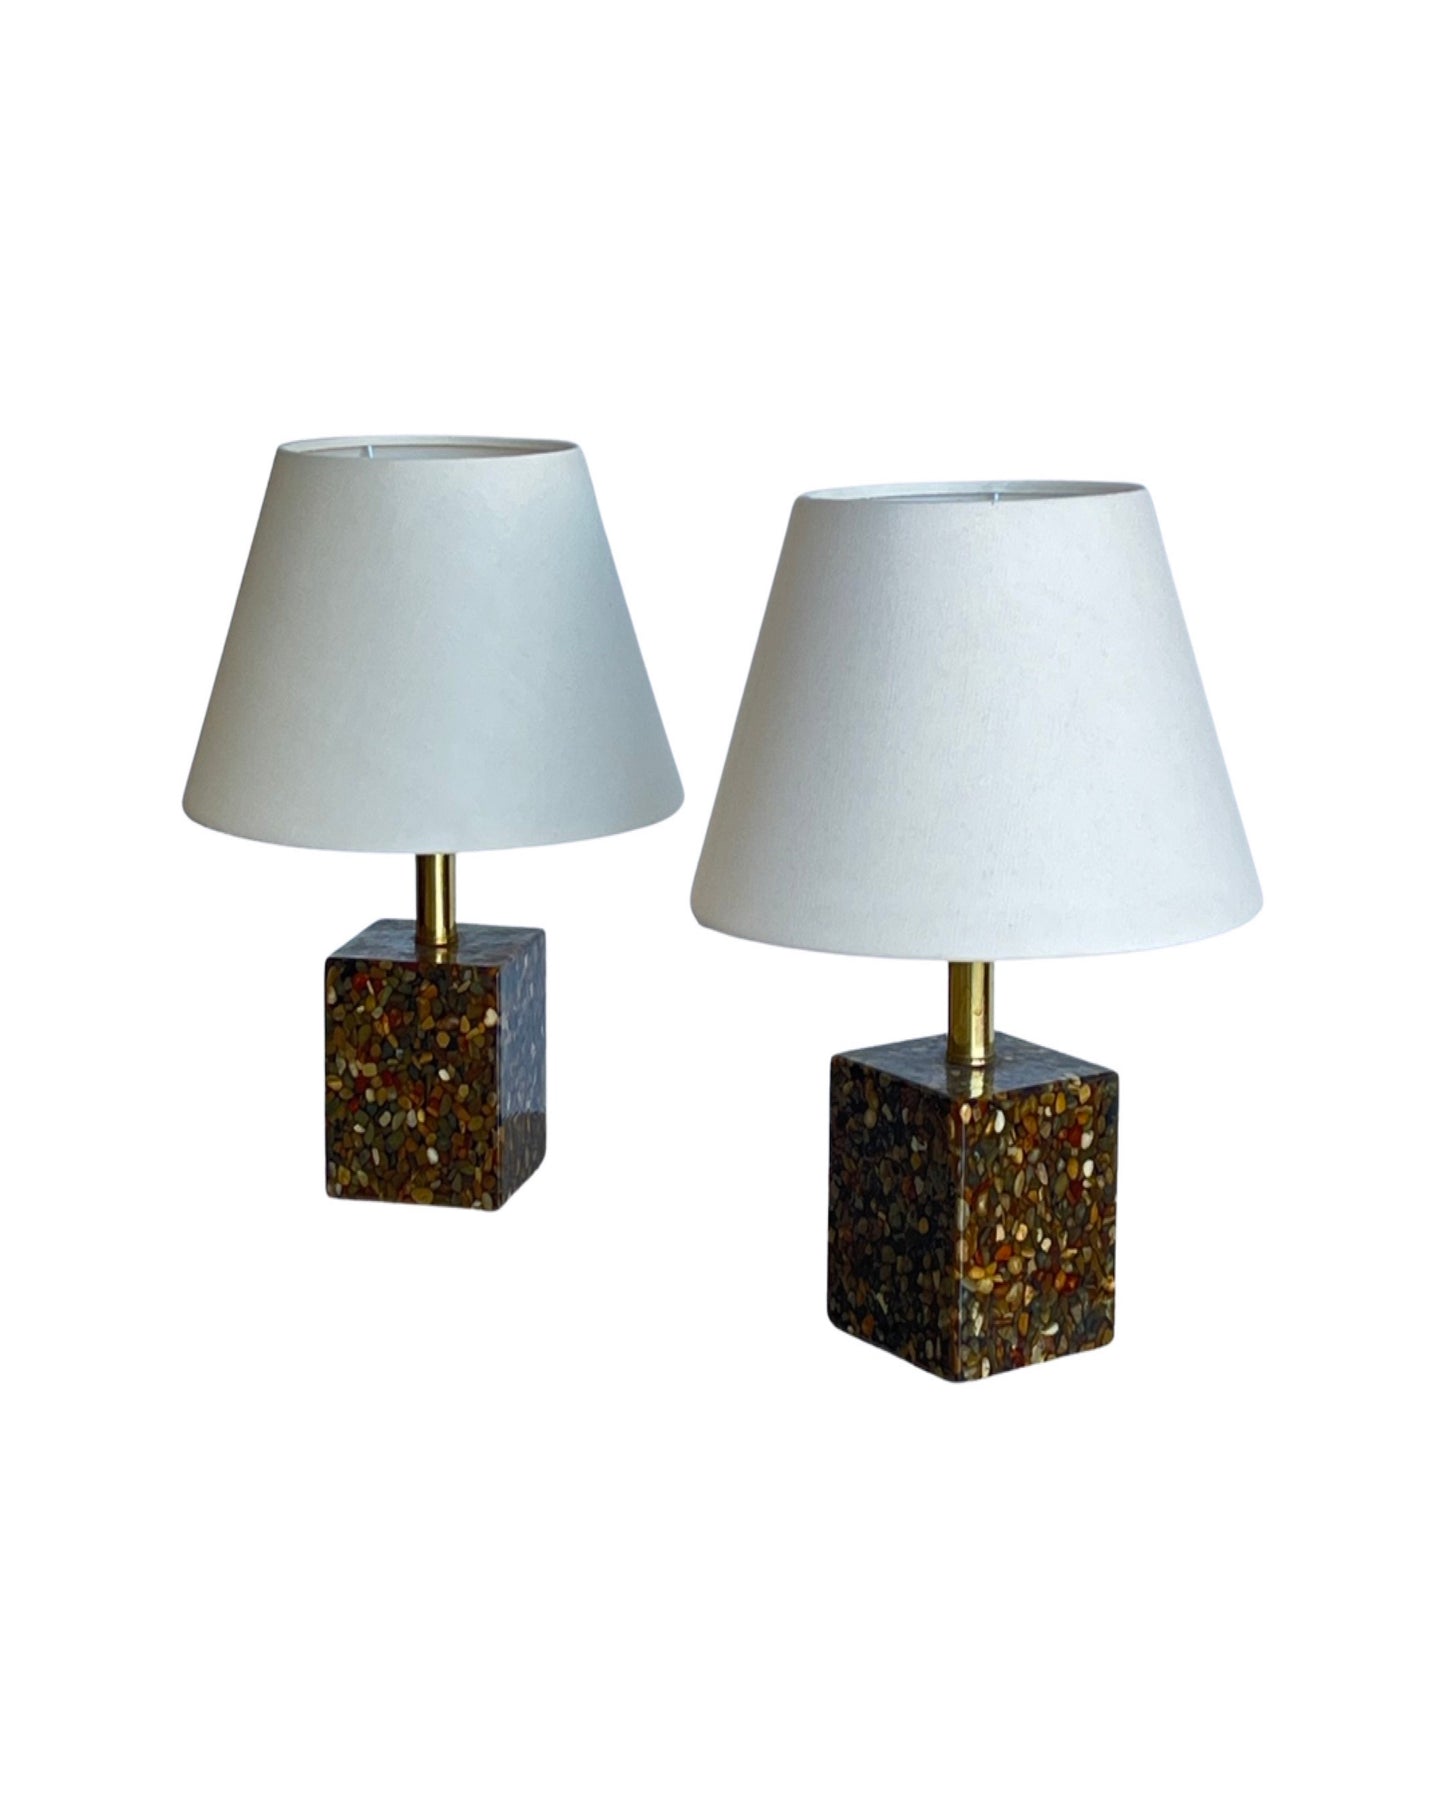 Set of Two Bed Side Lamps by Arte Luce in Brass and Resin, 1970s